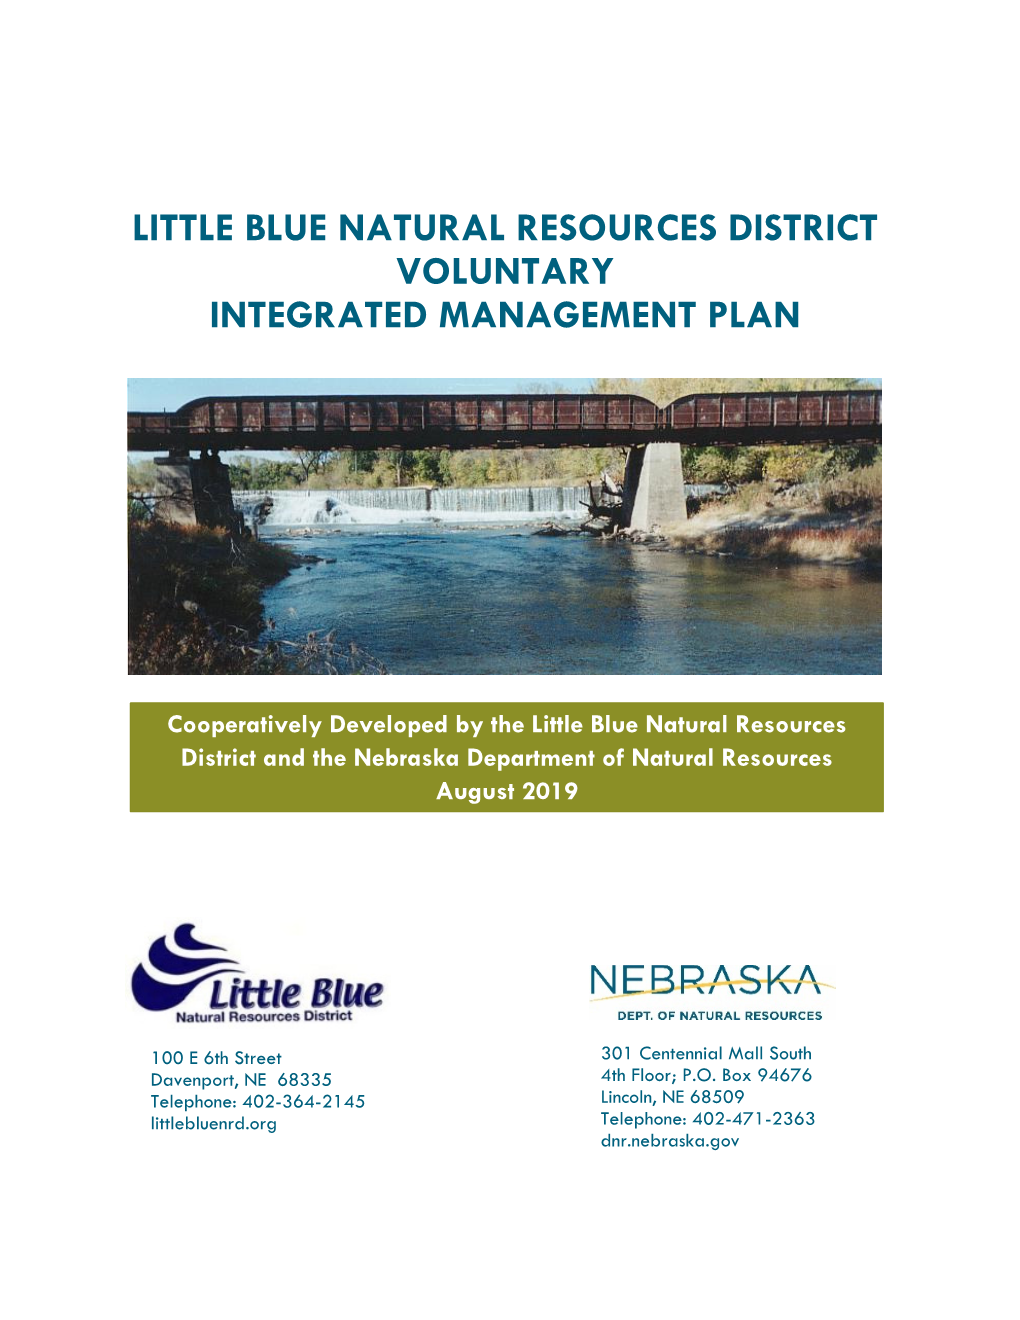 Little Blue Natural Resources District Voluntary Integrated Management Plan